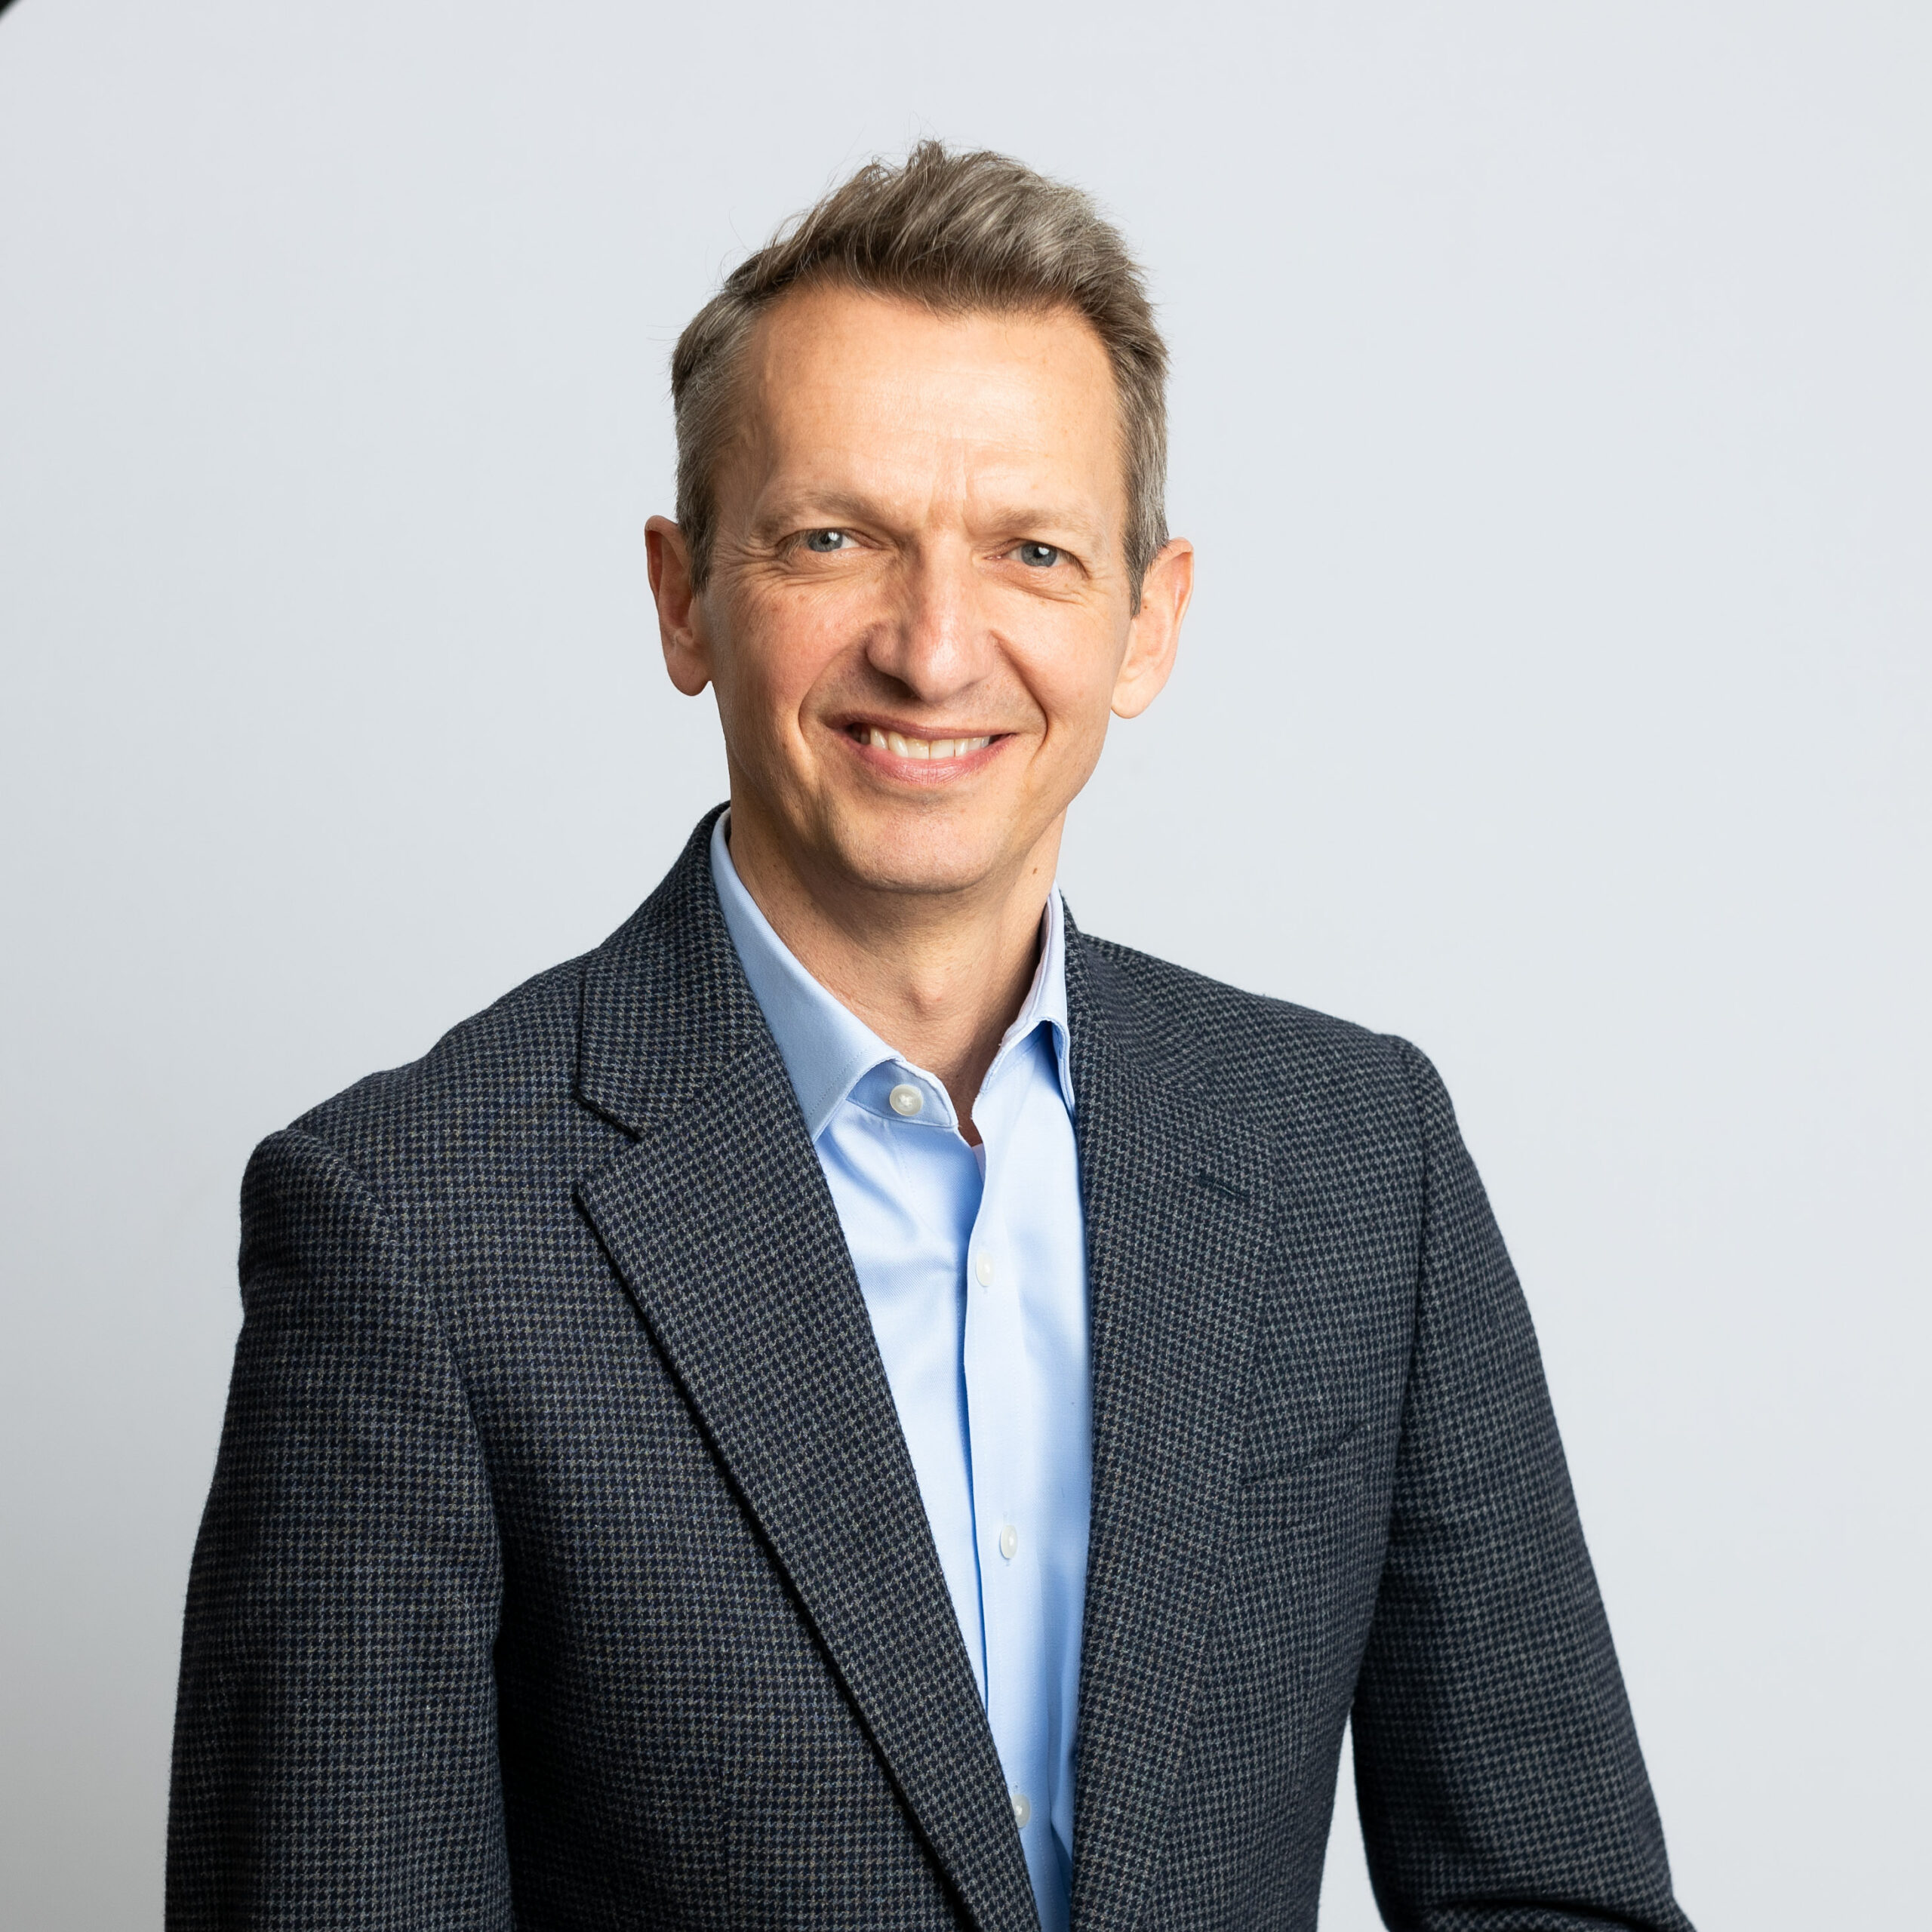 The Polycrisis: How to turn our system around - Andy Haldane on the Change Makers podcast